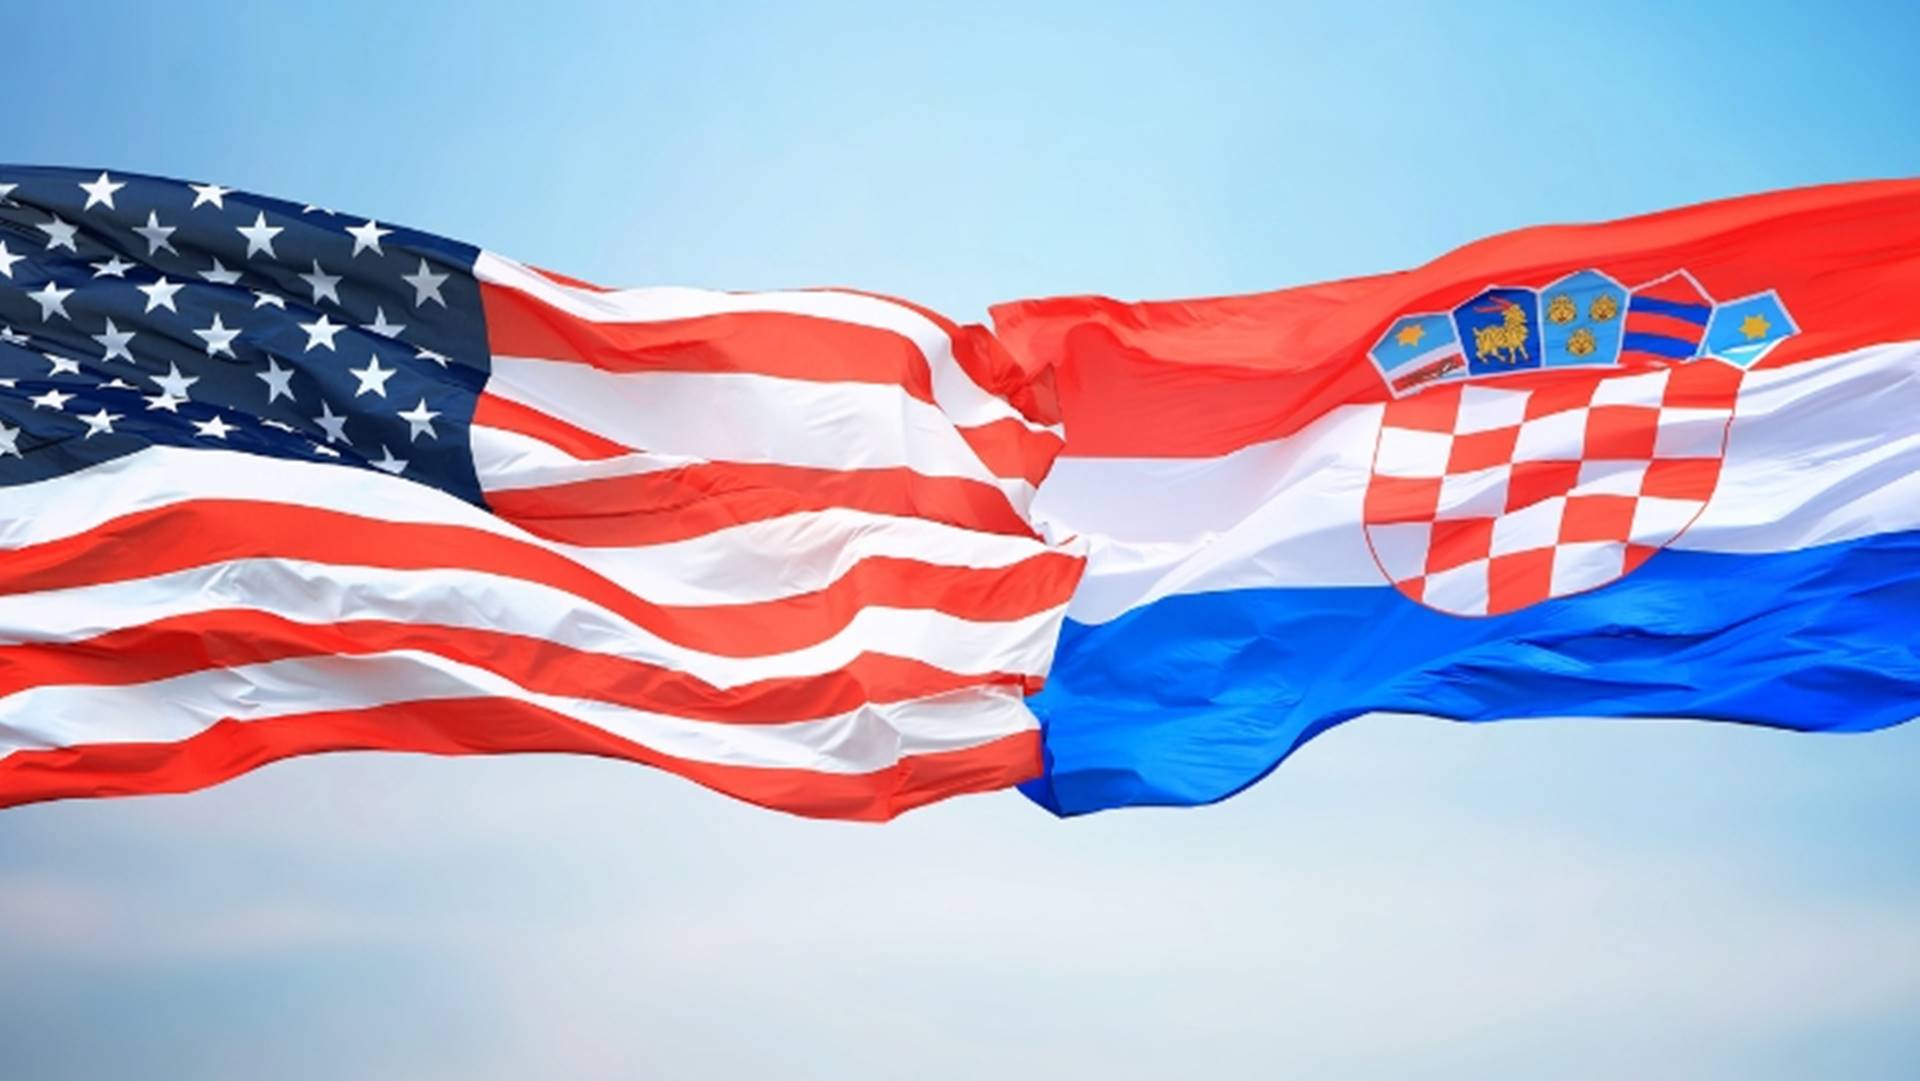 IT'S OFFICIAL - Croatians no longer need visas to visit the USA from December!